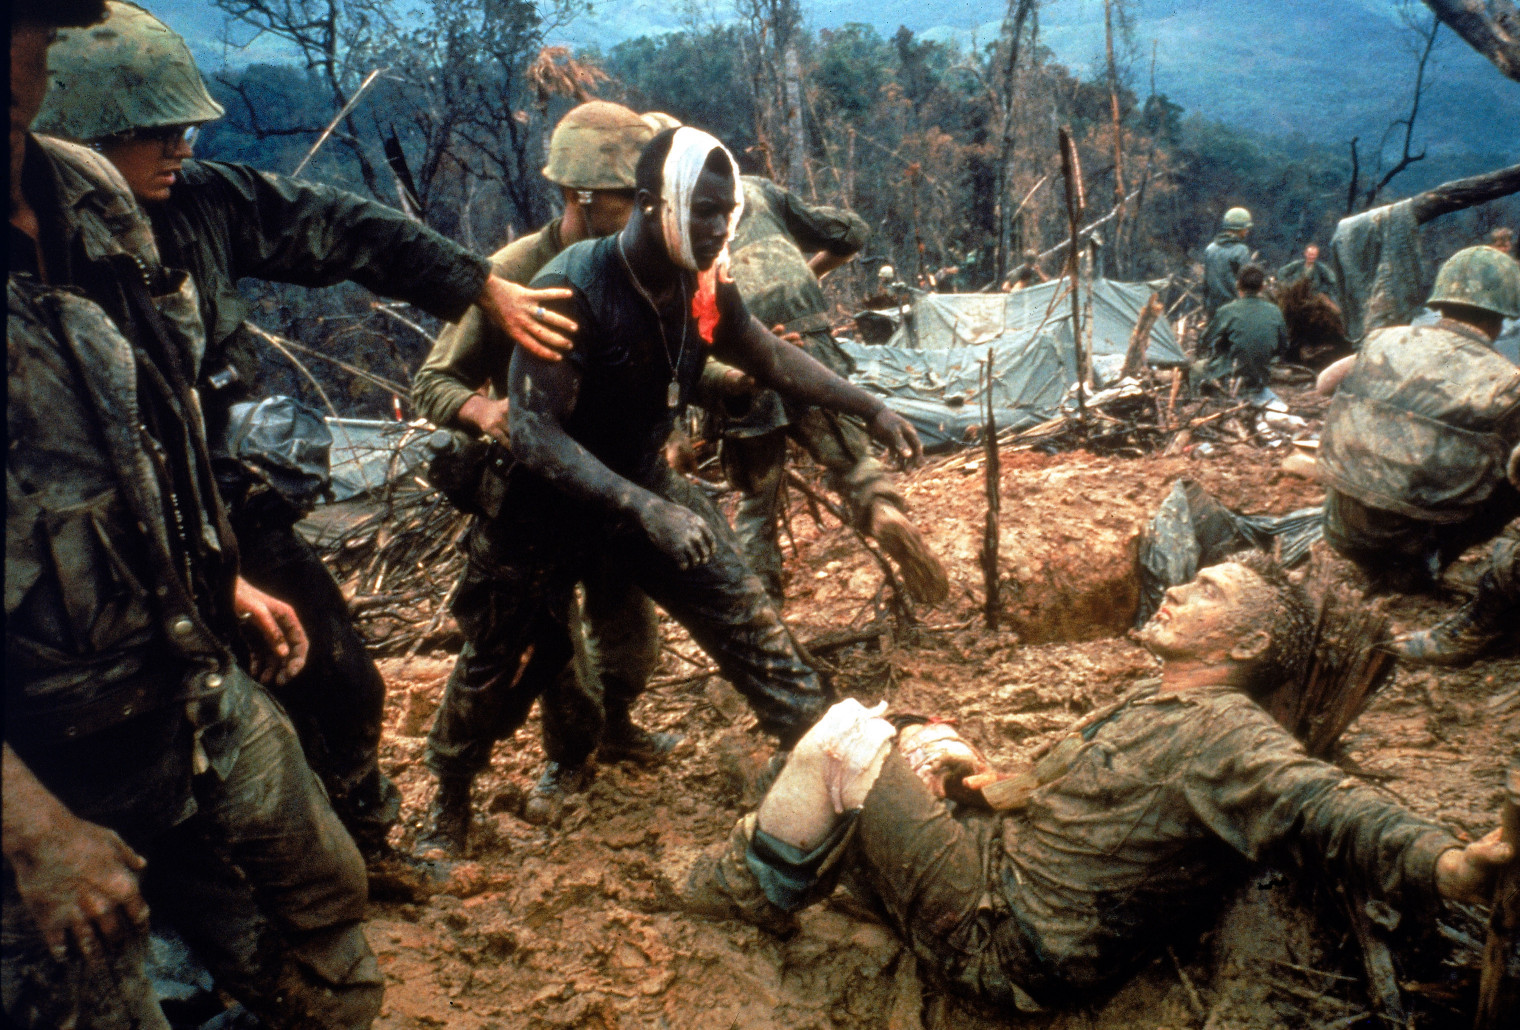 At First-Aid Center During Operation Prairie